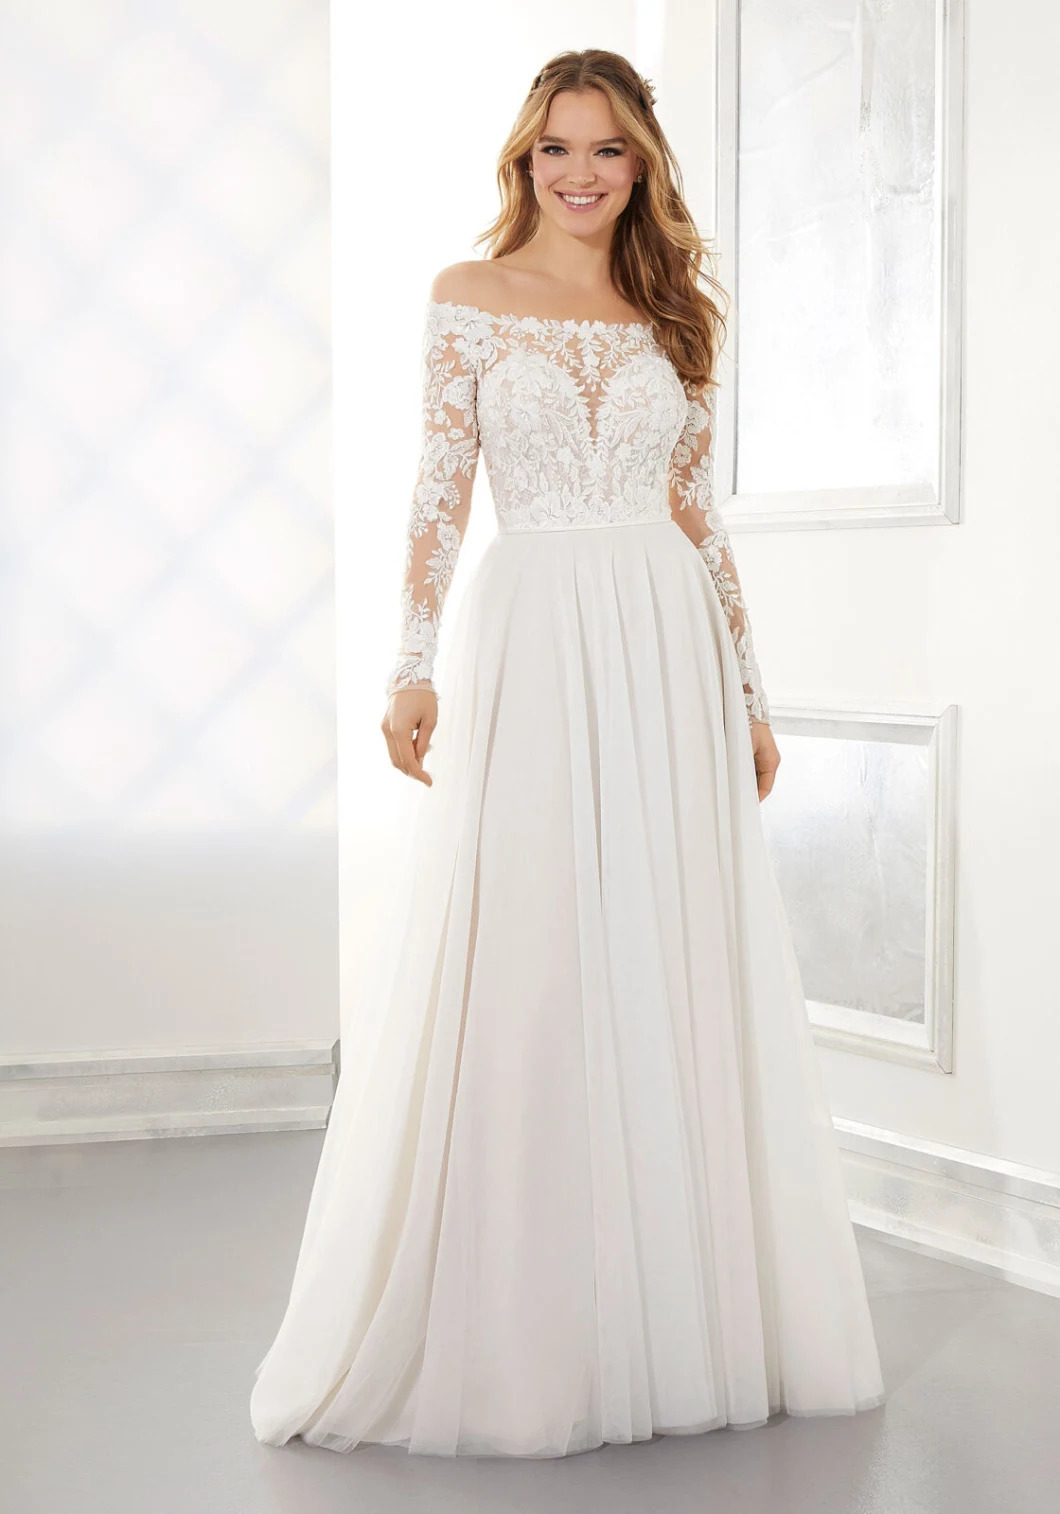 English Net and Lace Has Long Sleeves Wedding Dresses off The Shoulder A-Line Wedding Dress